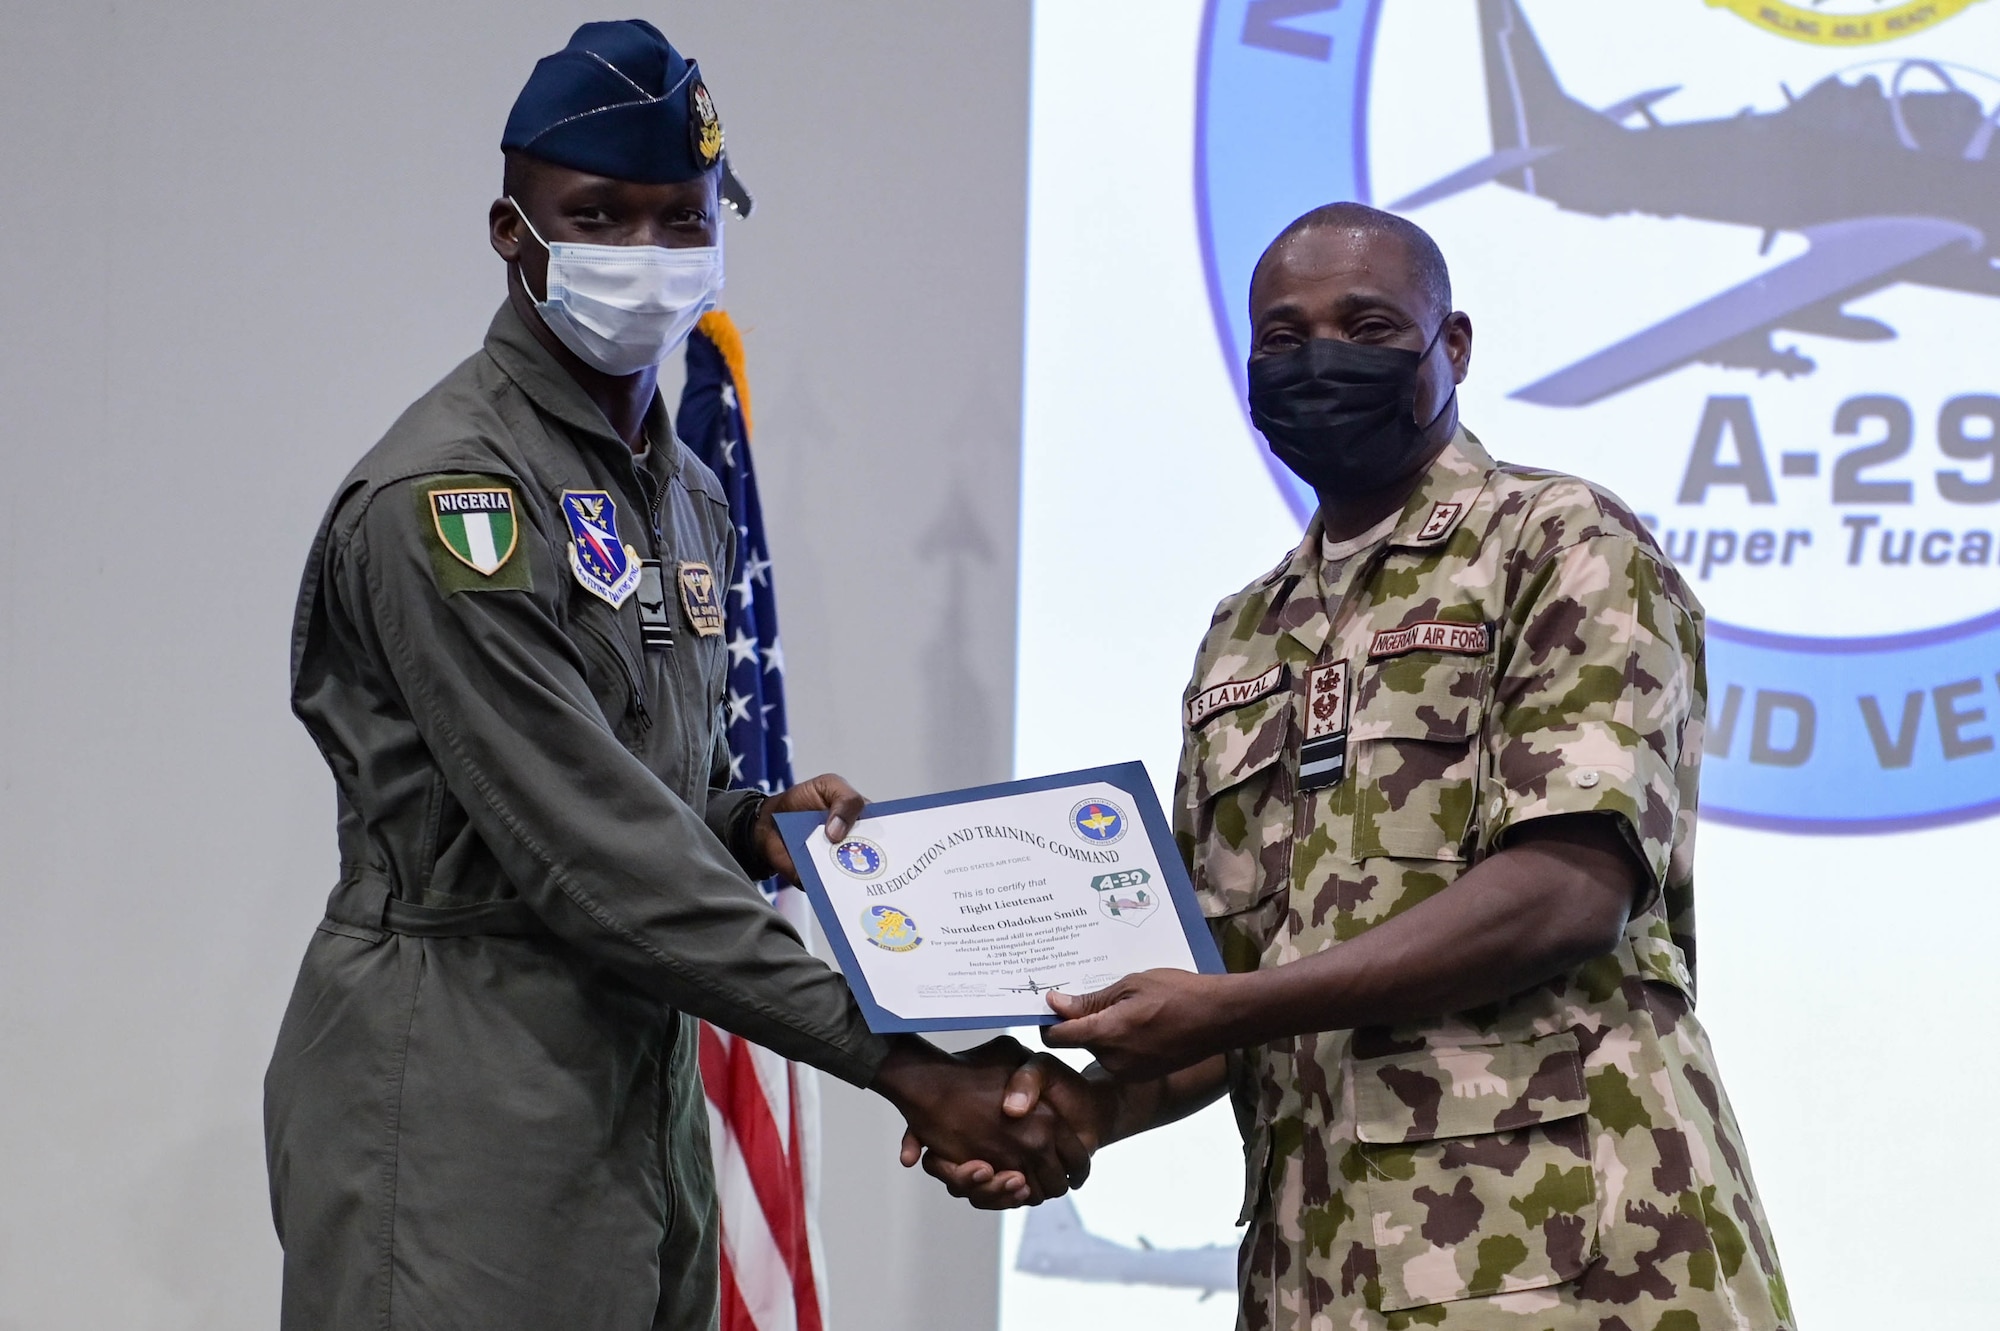 Nigerian Air Force Air Vice Marshal Sule Lawal, Nigerian A-29 program lead foreign liaison officer, right, recognizes Nigerian Air Force A-29 Super Tucano pilot, left, as a distinguished graduate for the instructor upgrade syllabus during the NAF A-29 pilot graduation ceremony at Moody Air Force Base, Georgia, Sept. 2, 2021. In under one year, the NAF pilots became mission ready through their hard work and dedication in their training. (U.S. Air Force photo by Senior Airman Rebeckah Medeiros)